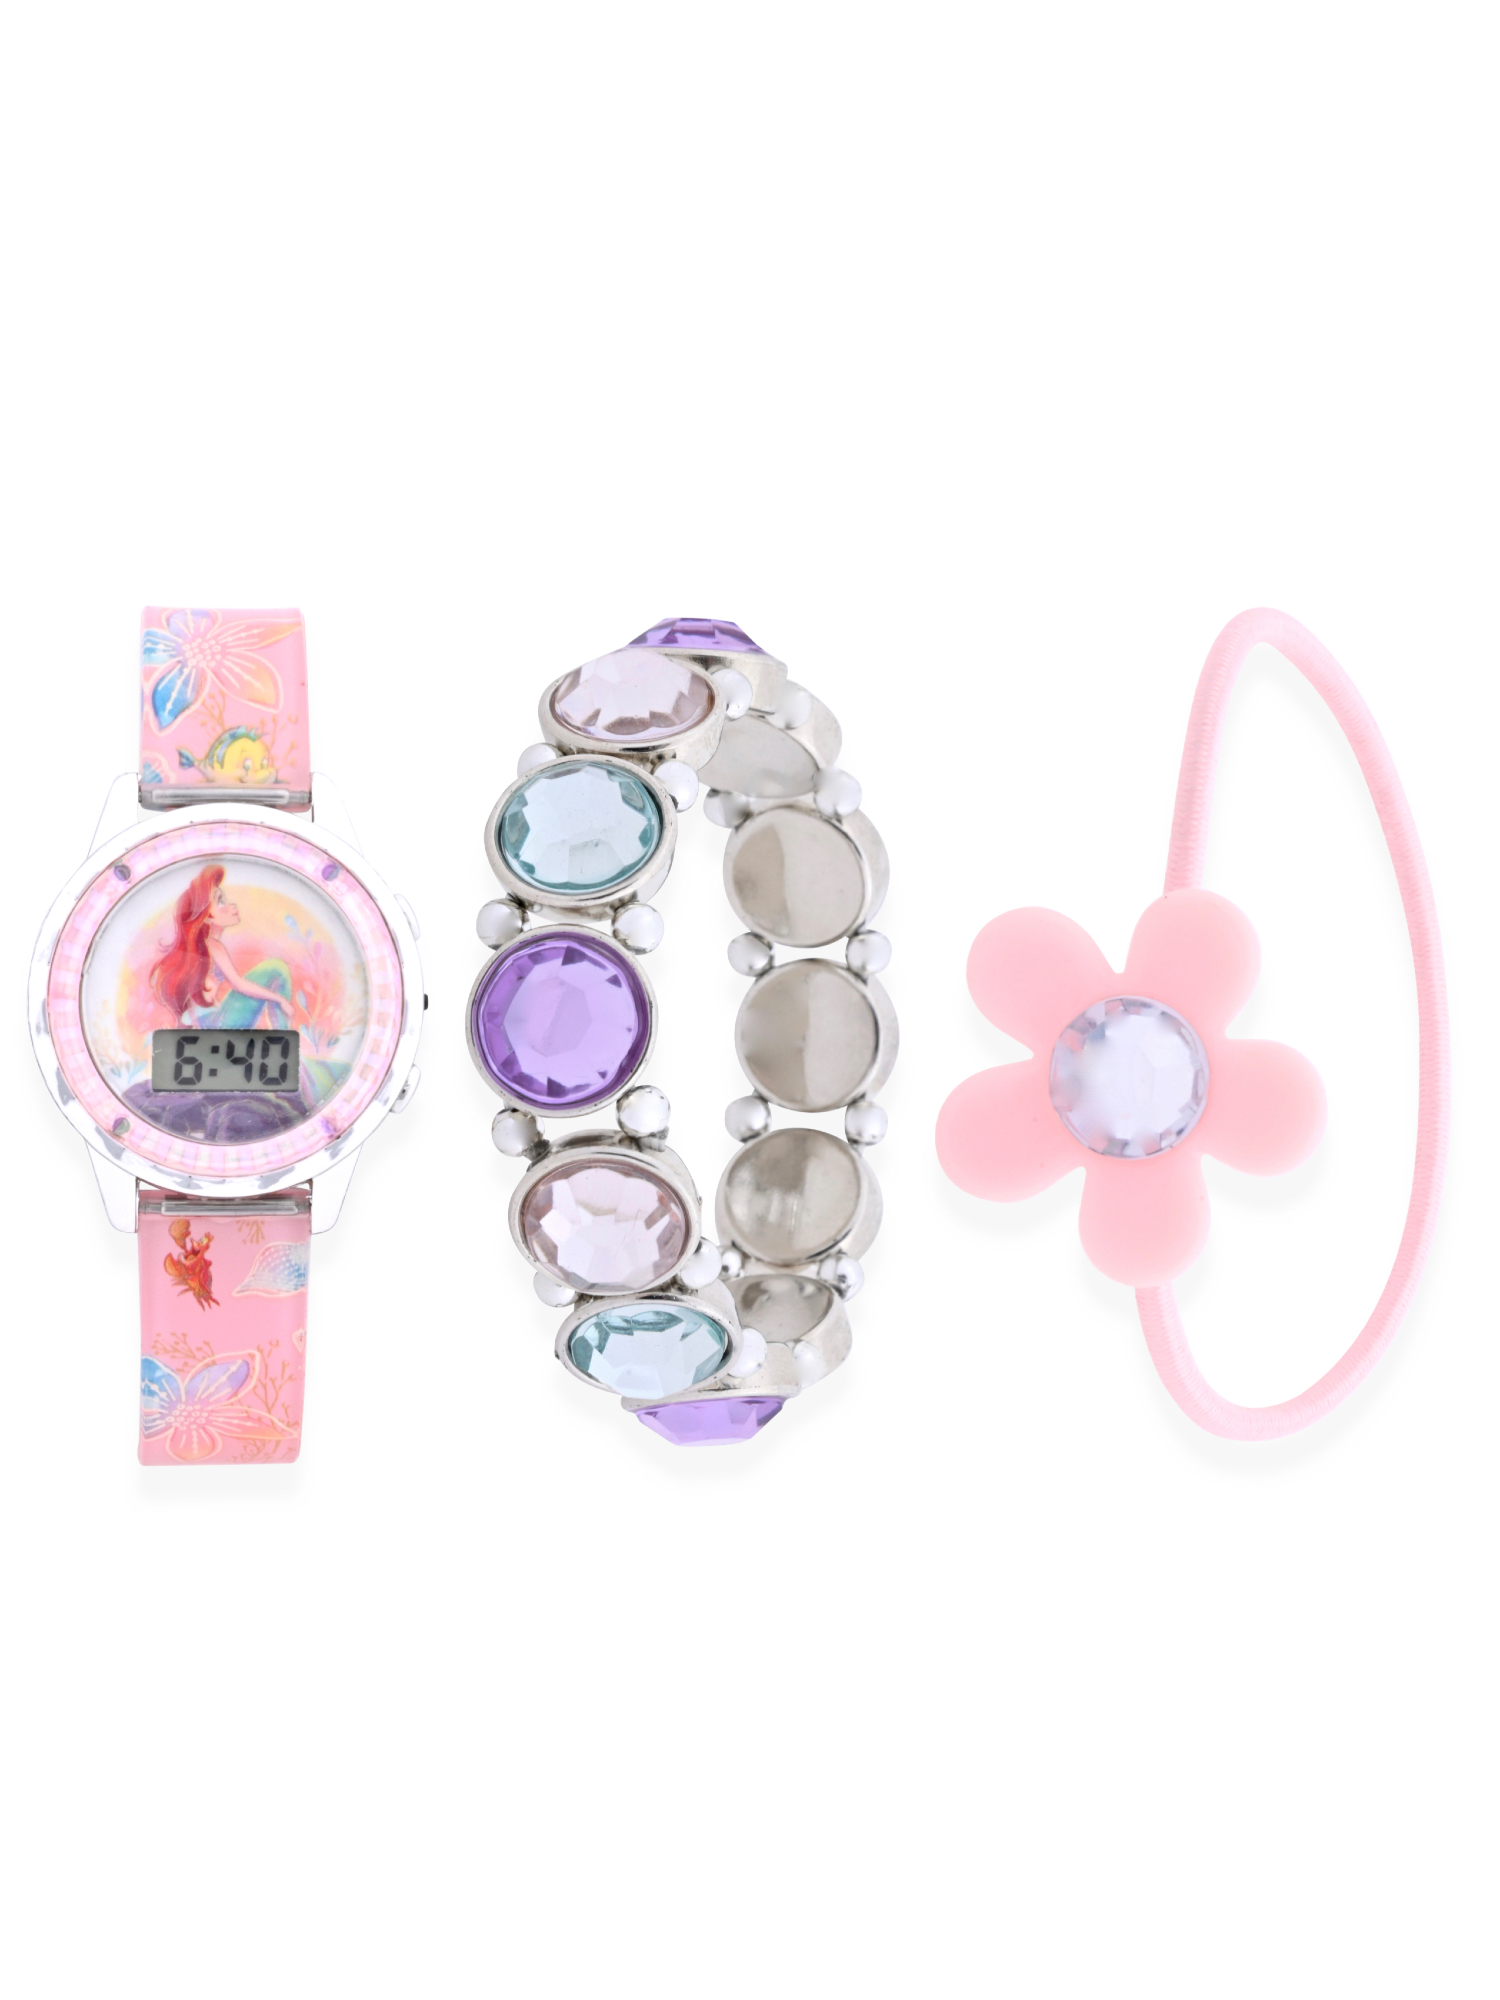 Disney Princess Ariel Girls Flashing LCD Pink Ombre Silicone Watch, Bracelet and Hair Accessory 3 Piece Set - image 1 of 6